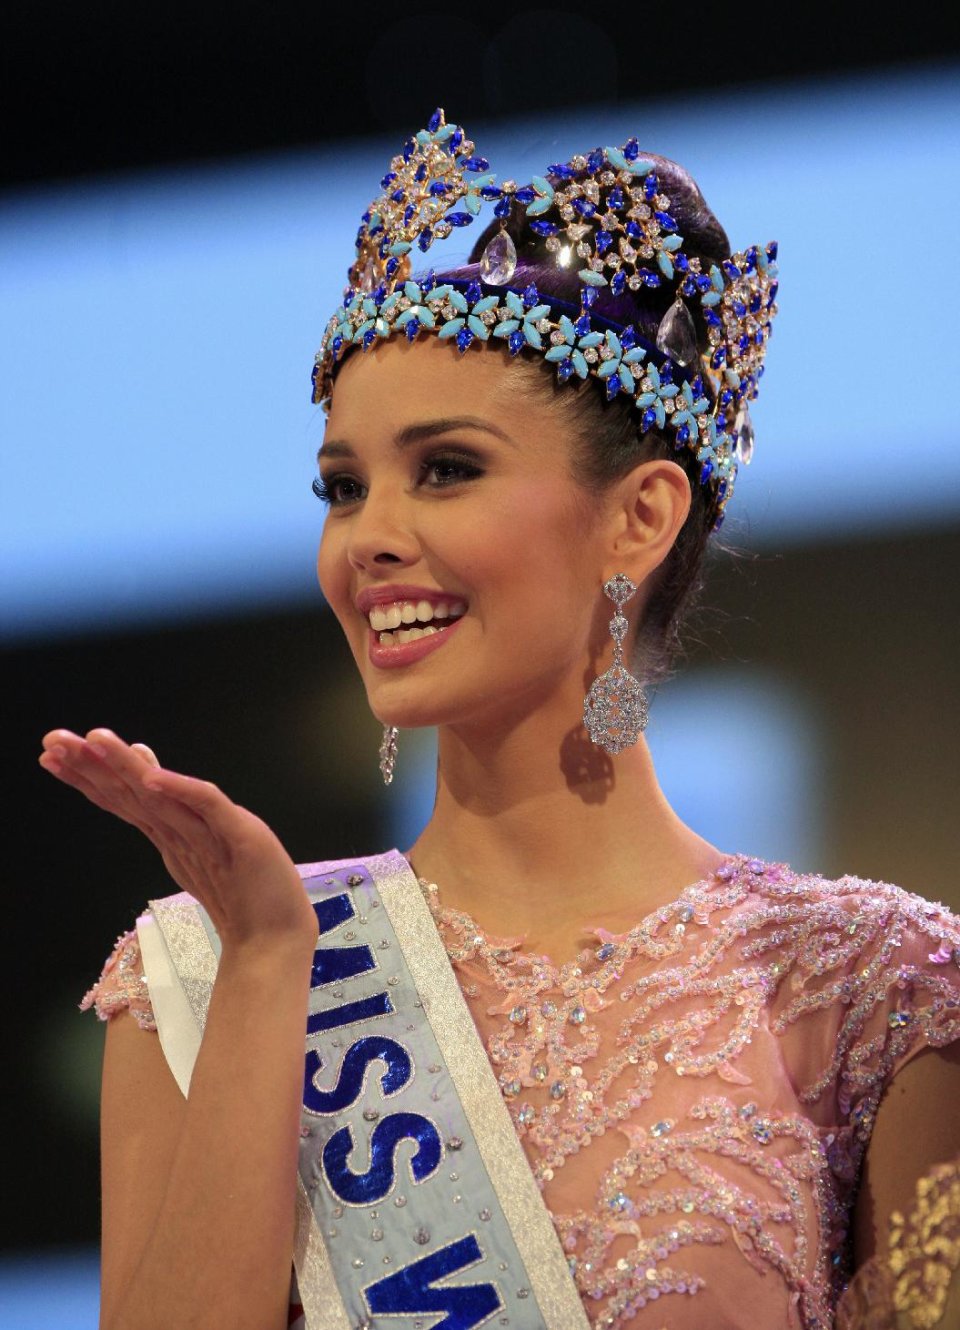 Newly crowned Miss World Megan Young of the Philippines, smiles after winning the Miss World contest, in Nusa Dua, Bali, Indonesia, Saturday, Sept. 28, 2013. (AP Photo/Firdia Lisnawati)